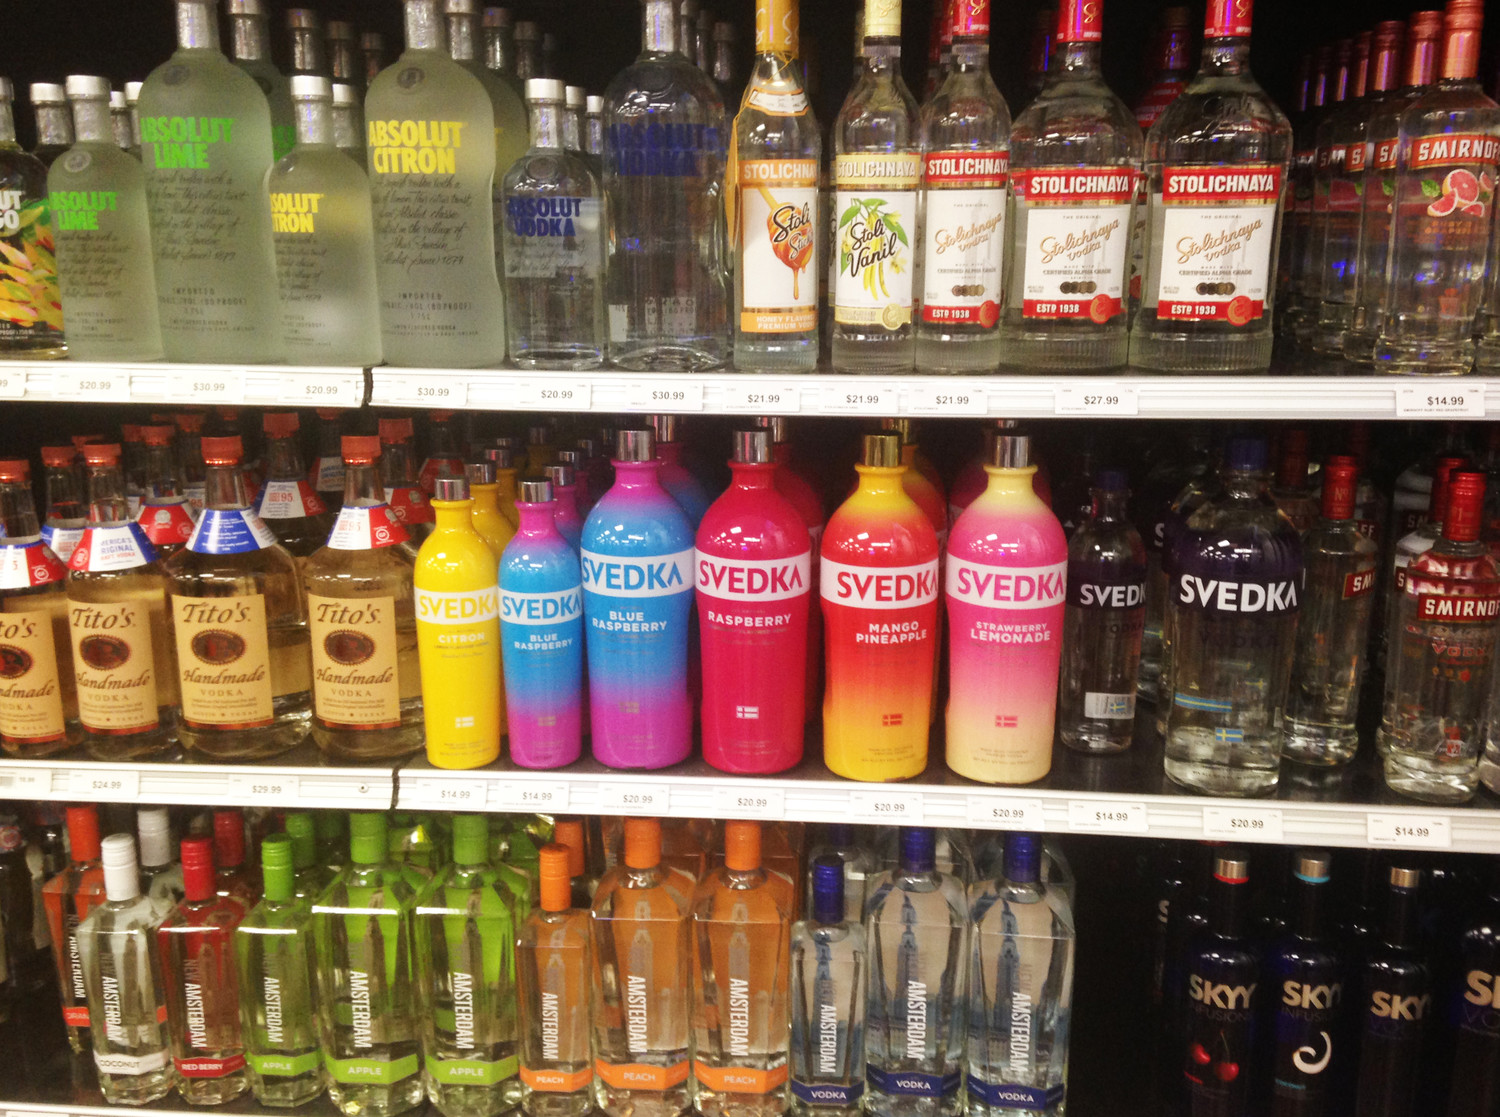 Shelves of vodka on display at a local liquor store in Providence.